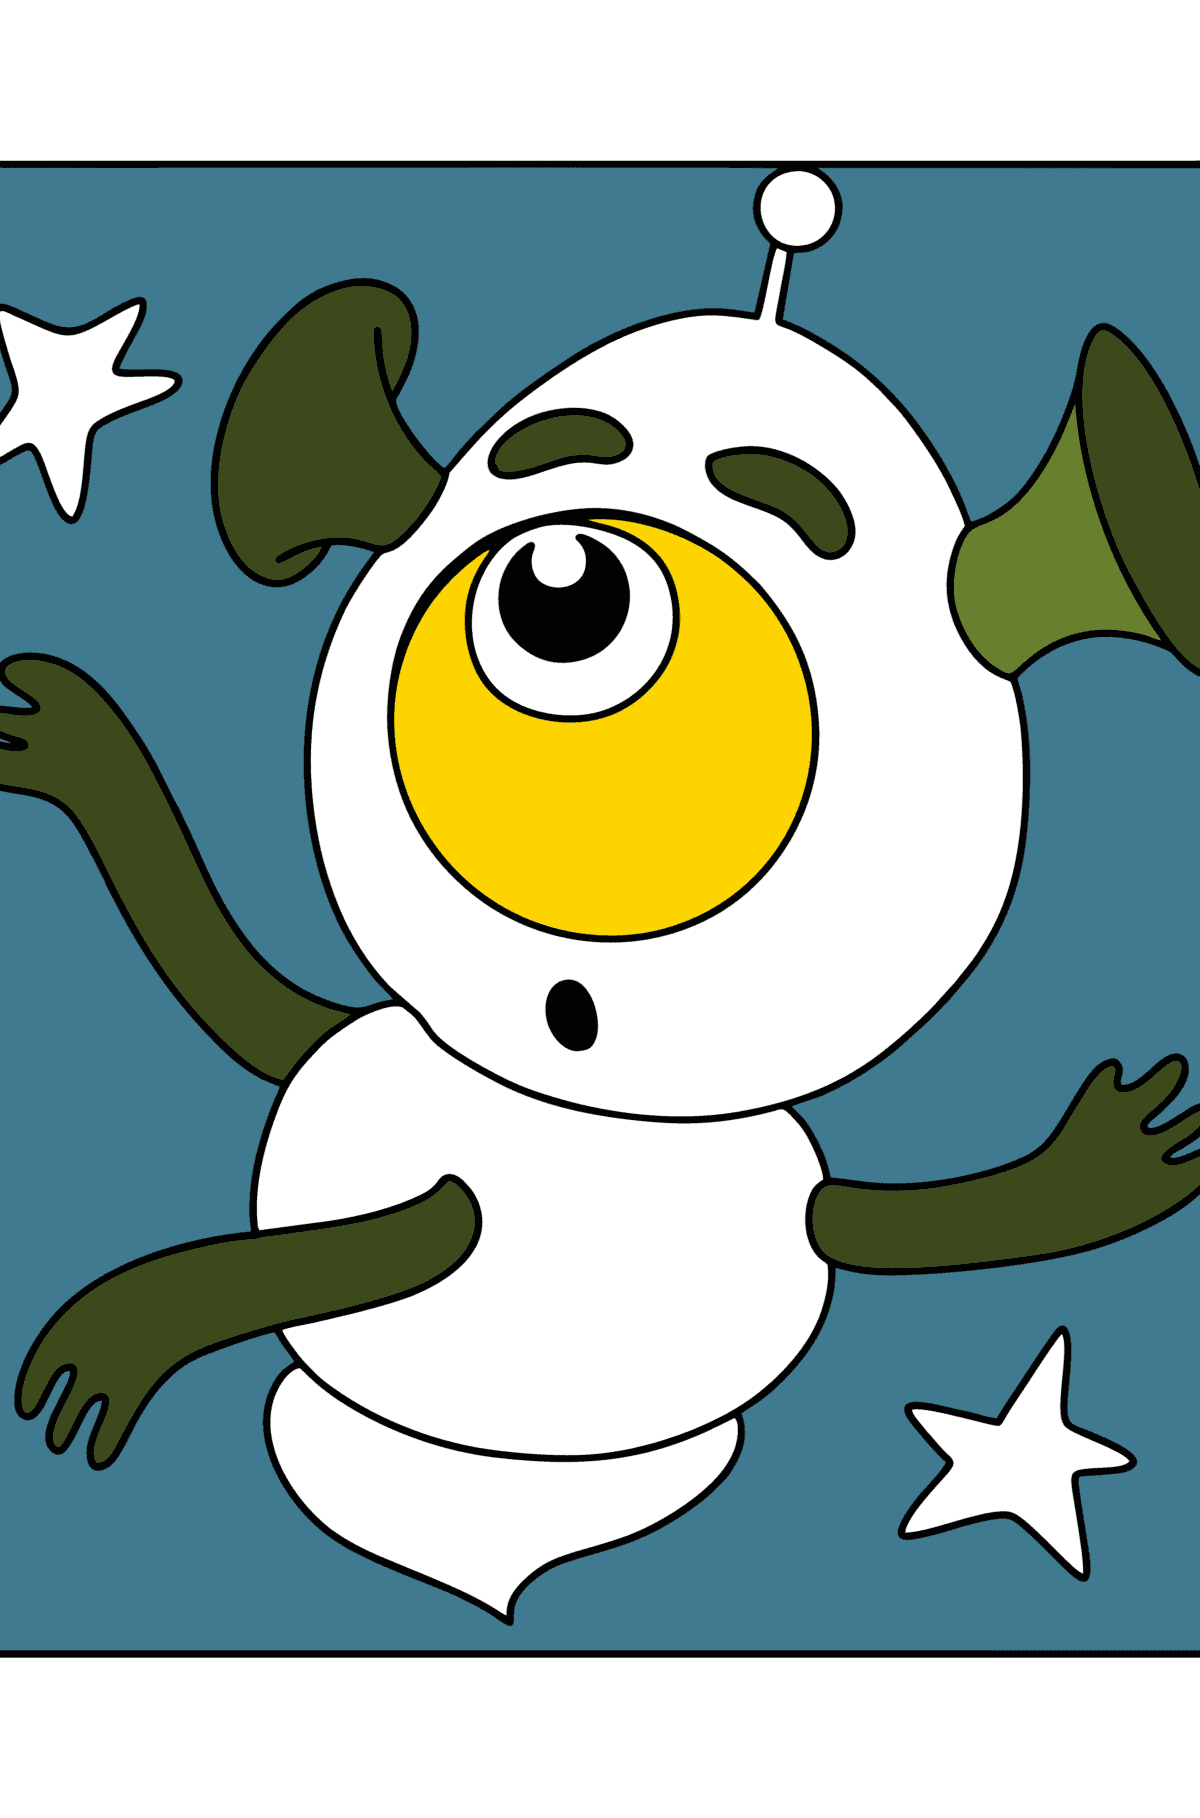 Little Alien Coloring page - Coloring Pages for Kids